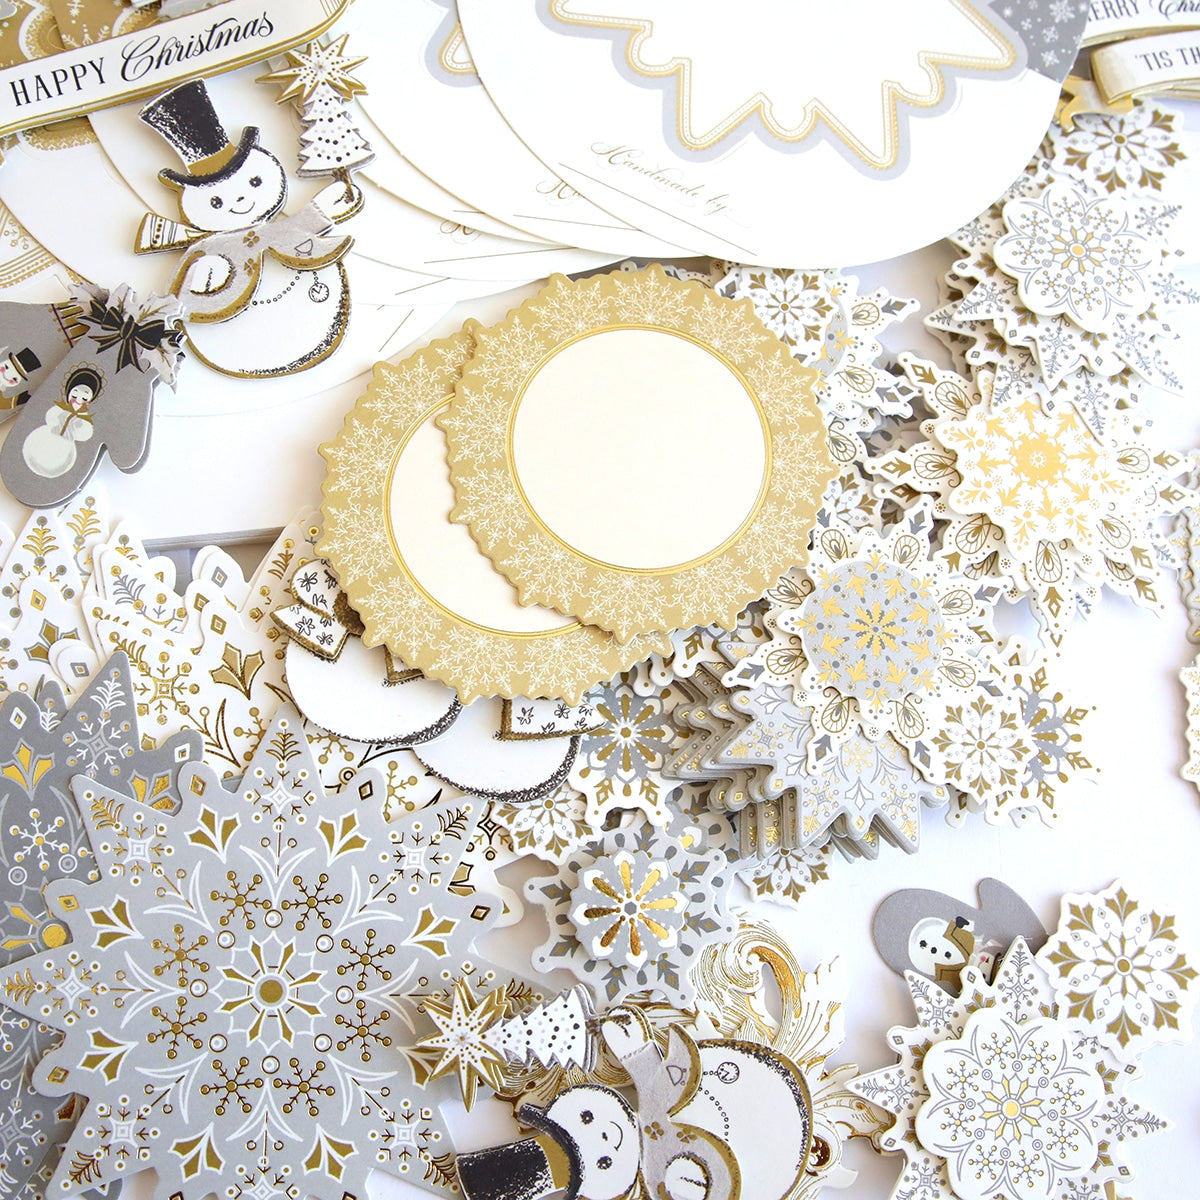 A collection of Simply Rocking Snowflake Card Kit on a white background.